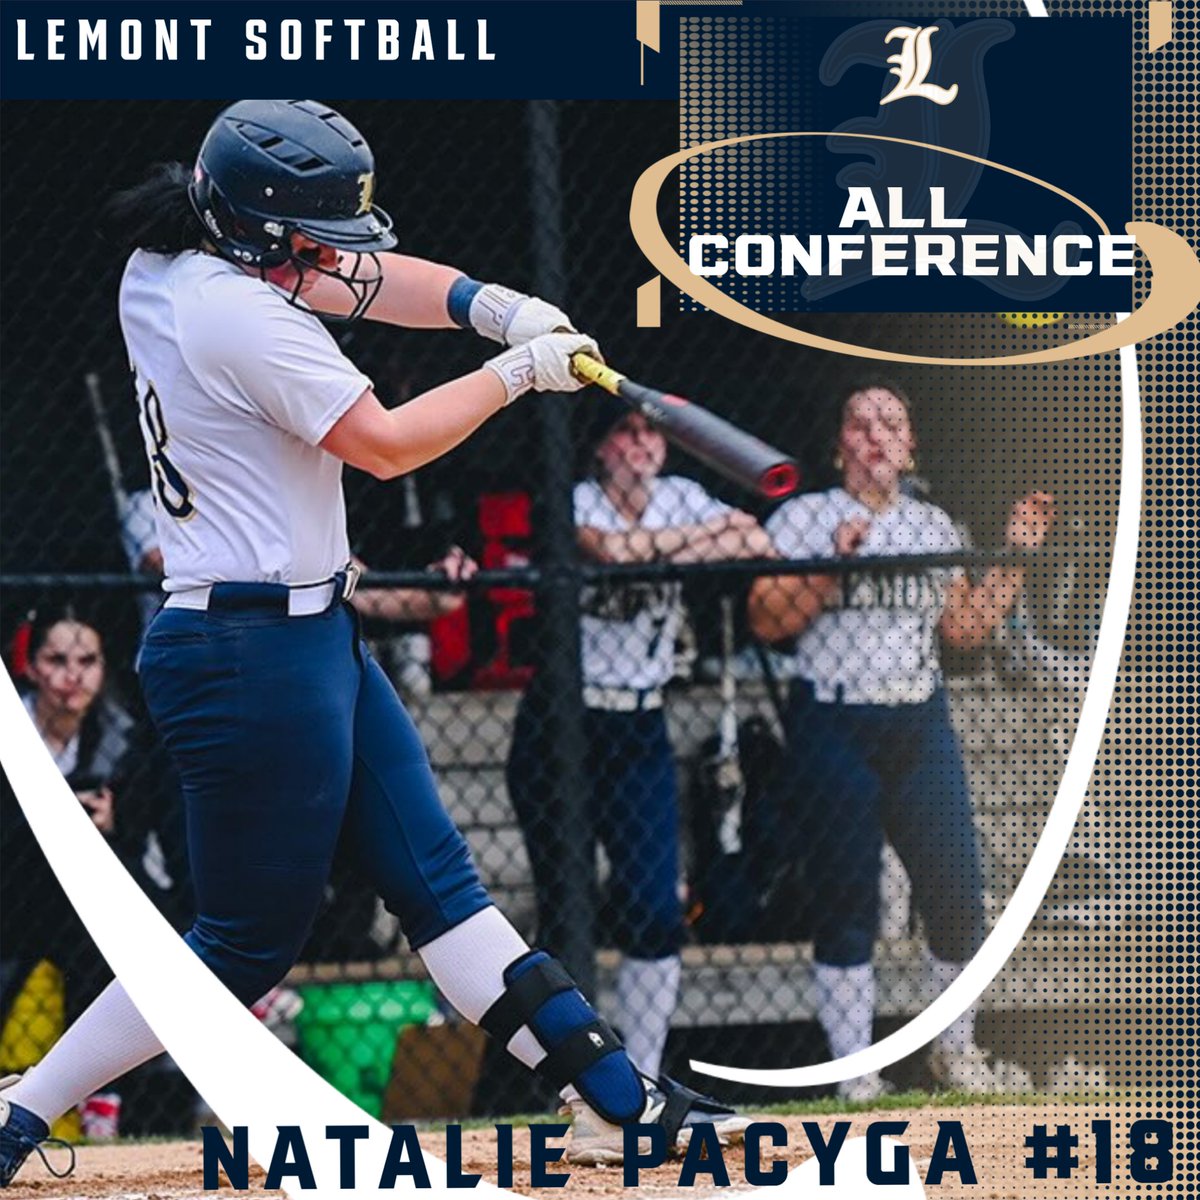 Congrats to @NataliePacyga for being selected for all conferece!